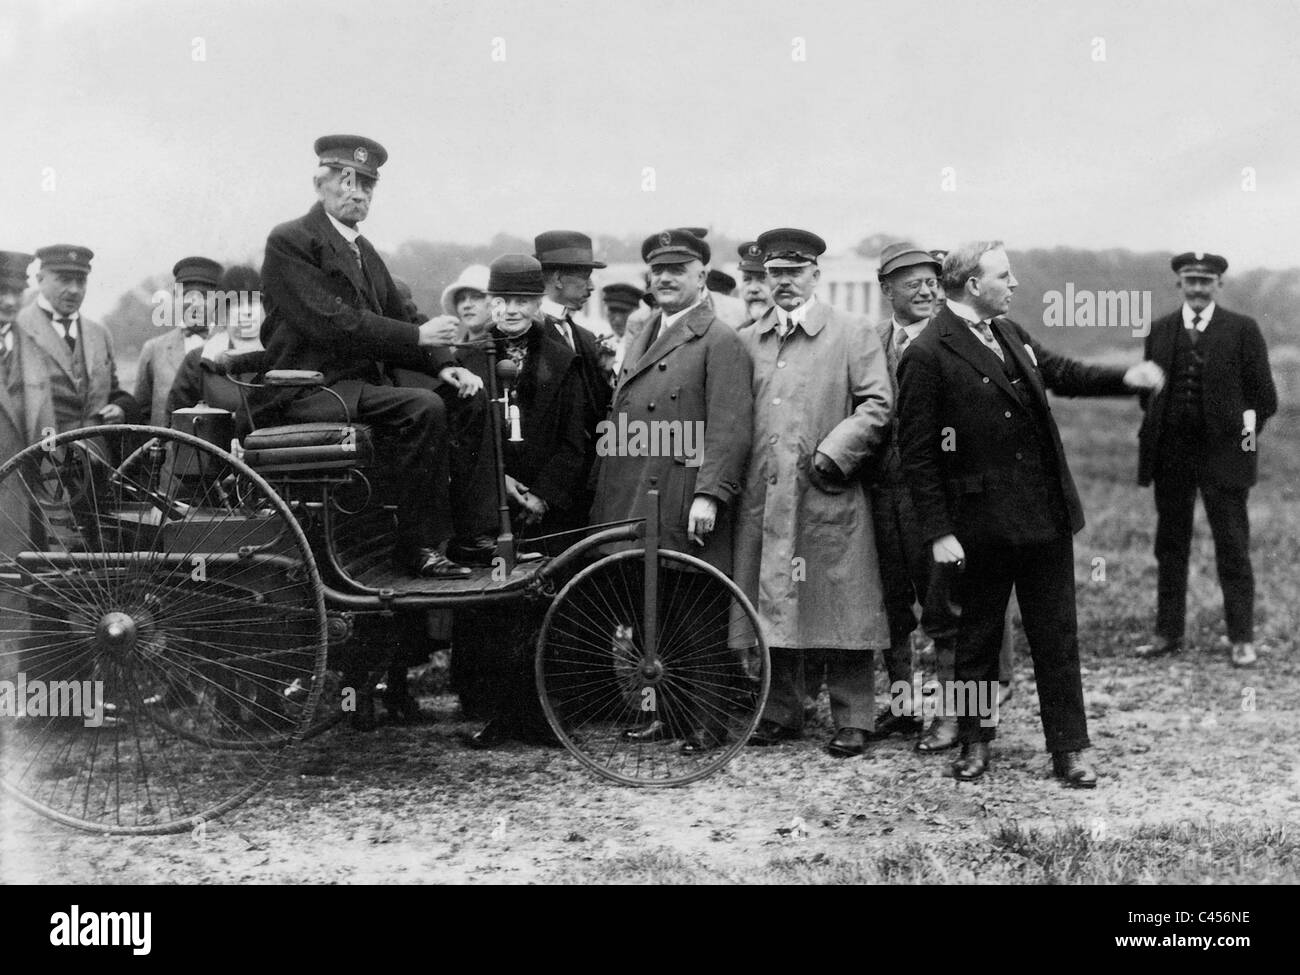 Carl Friedrich Benz in the Benz motor car from 1885, 1925 Stock Photo